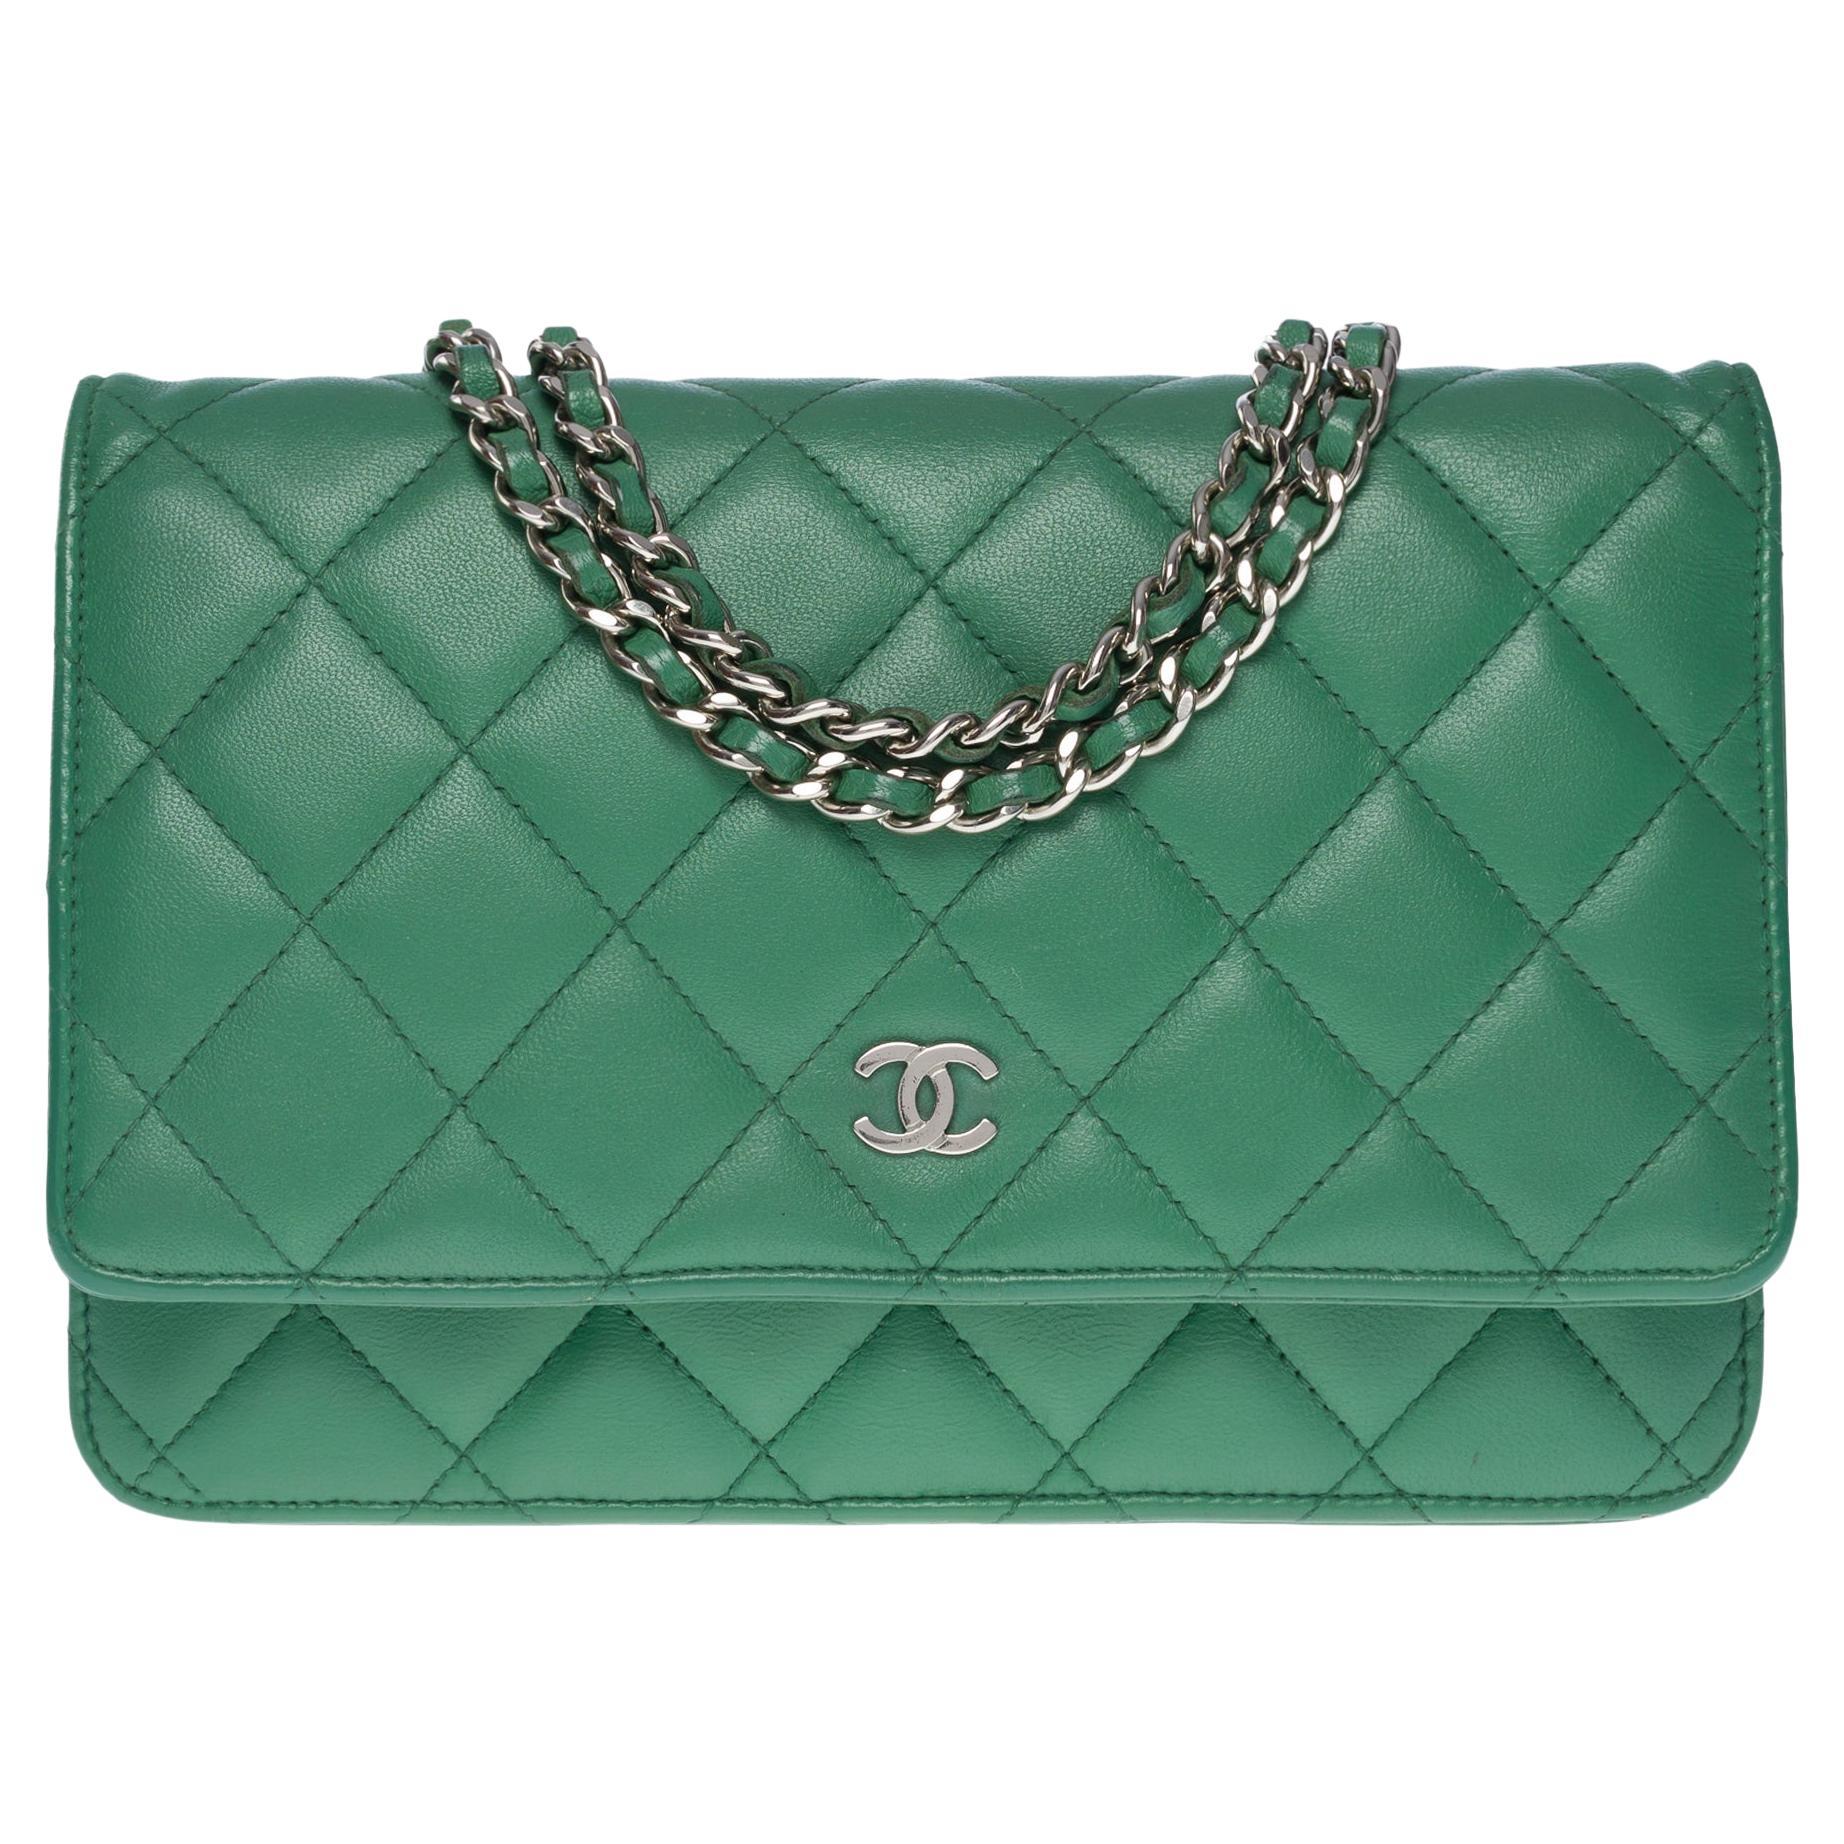 2013 Chanel Green Patent Leather SHW Silver Classic Wallet on Chain WOC Bag